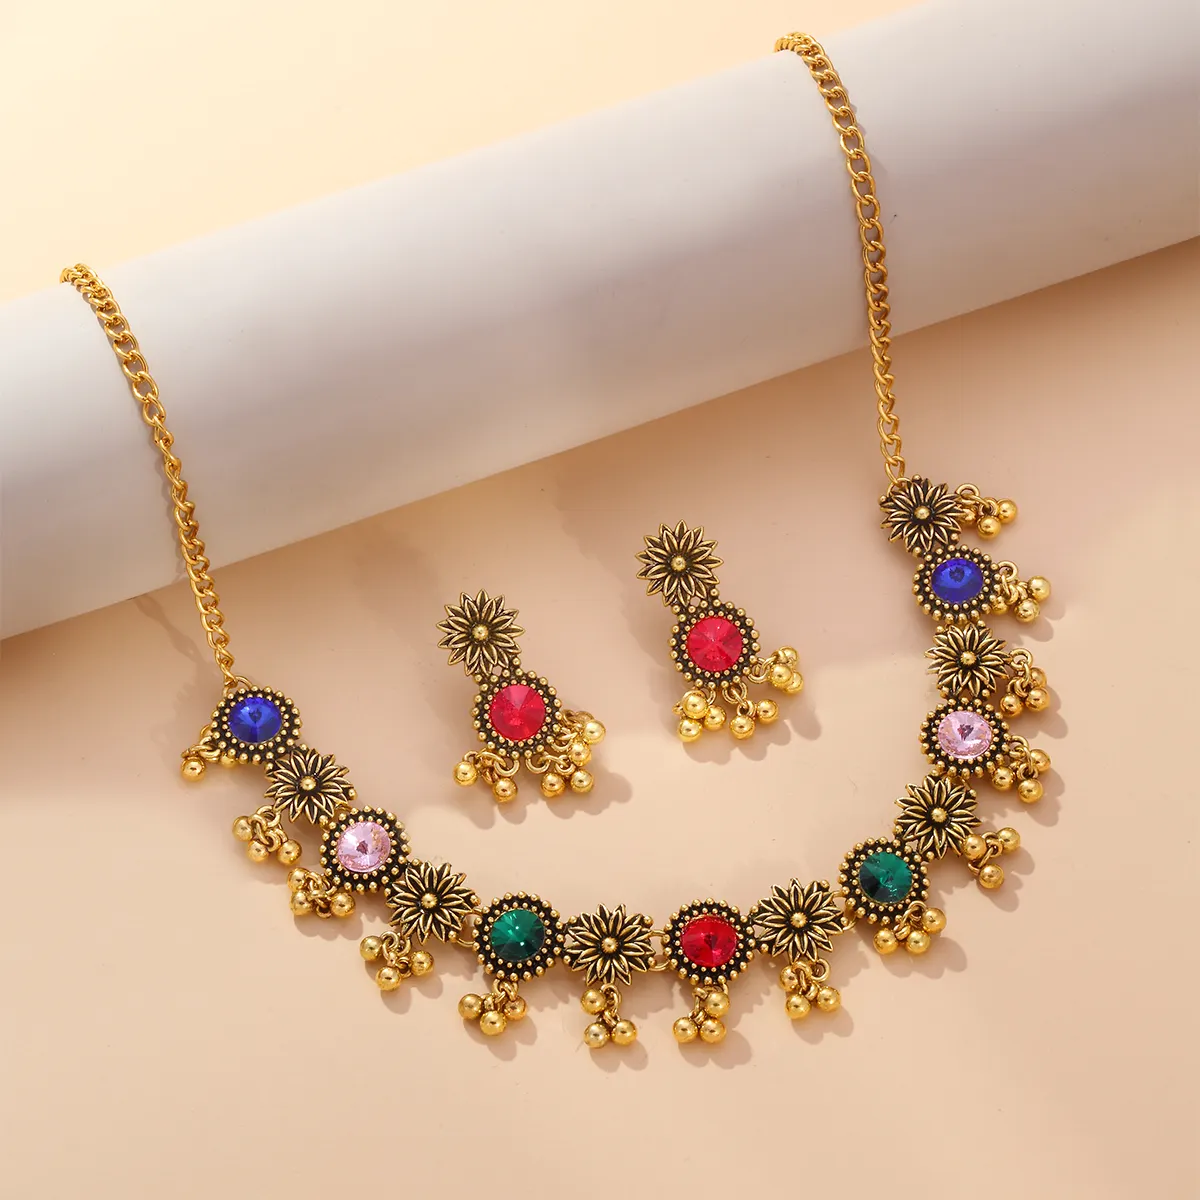 CDD Ethnic Inlaid Crystal Stone Women's Necklace Earrings Sets Vintage Indian Jewelry Set Luxury Gifts